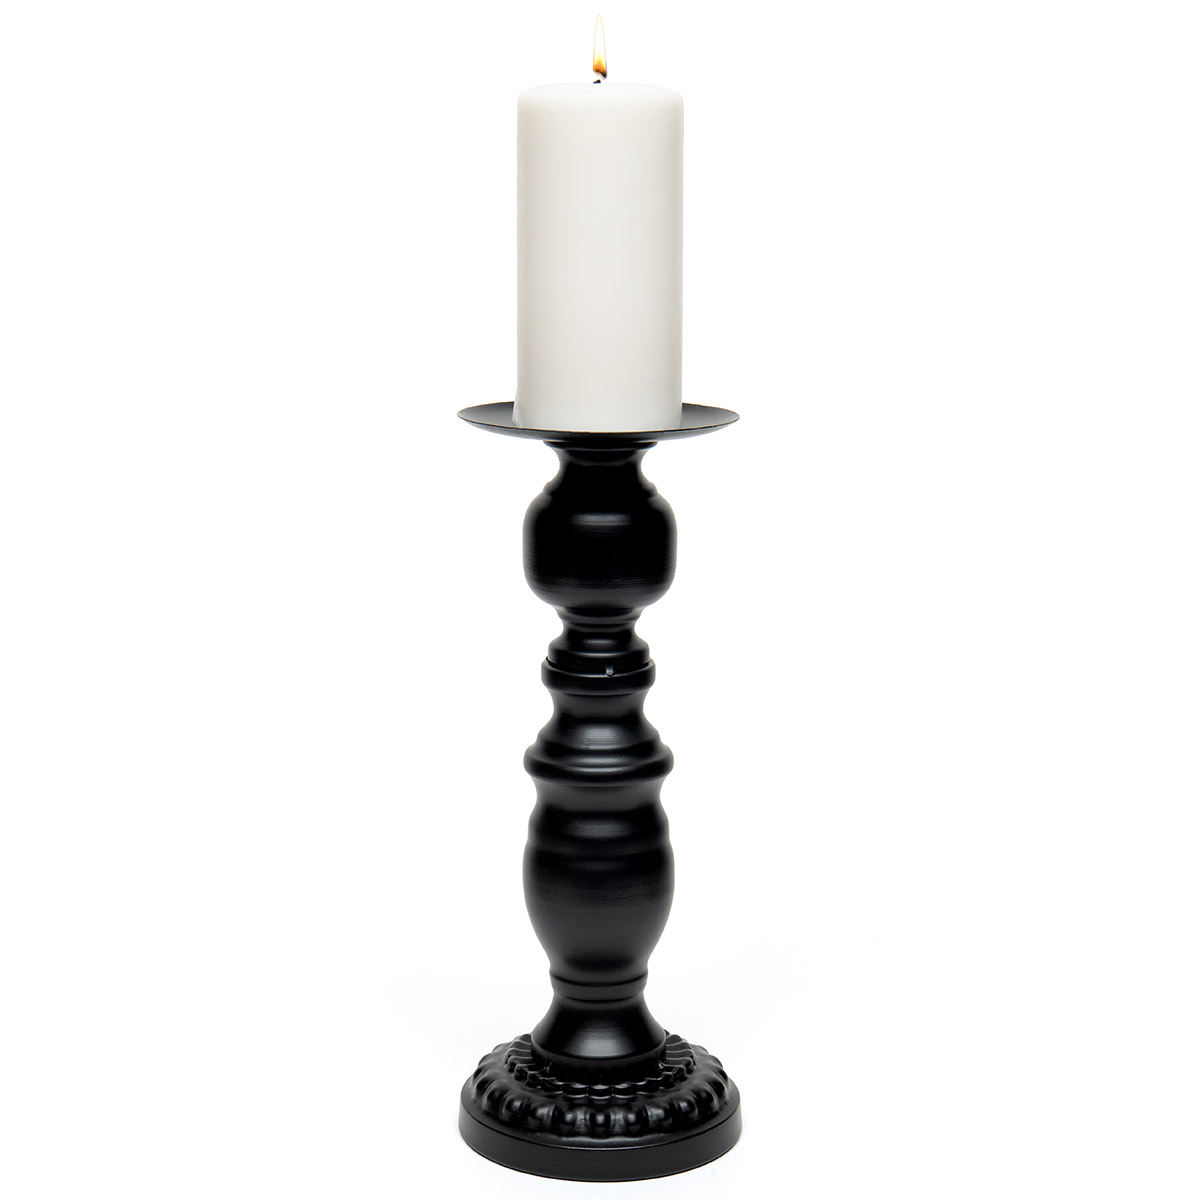 CANDLEHOLDER LARGE 5IN X 12.5IN MATTE BLACK METAL - Click Image to Close